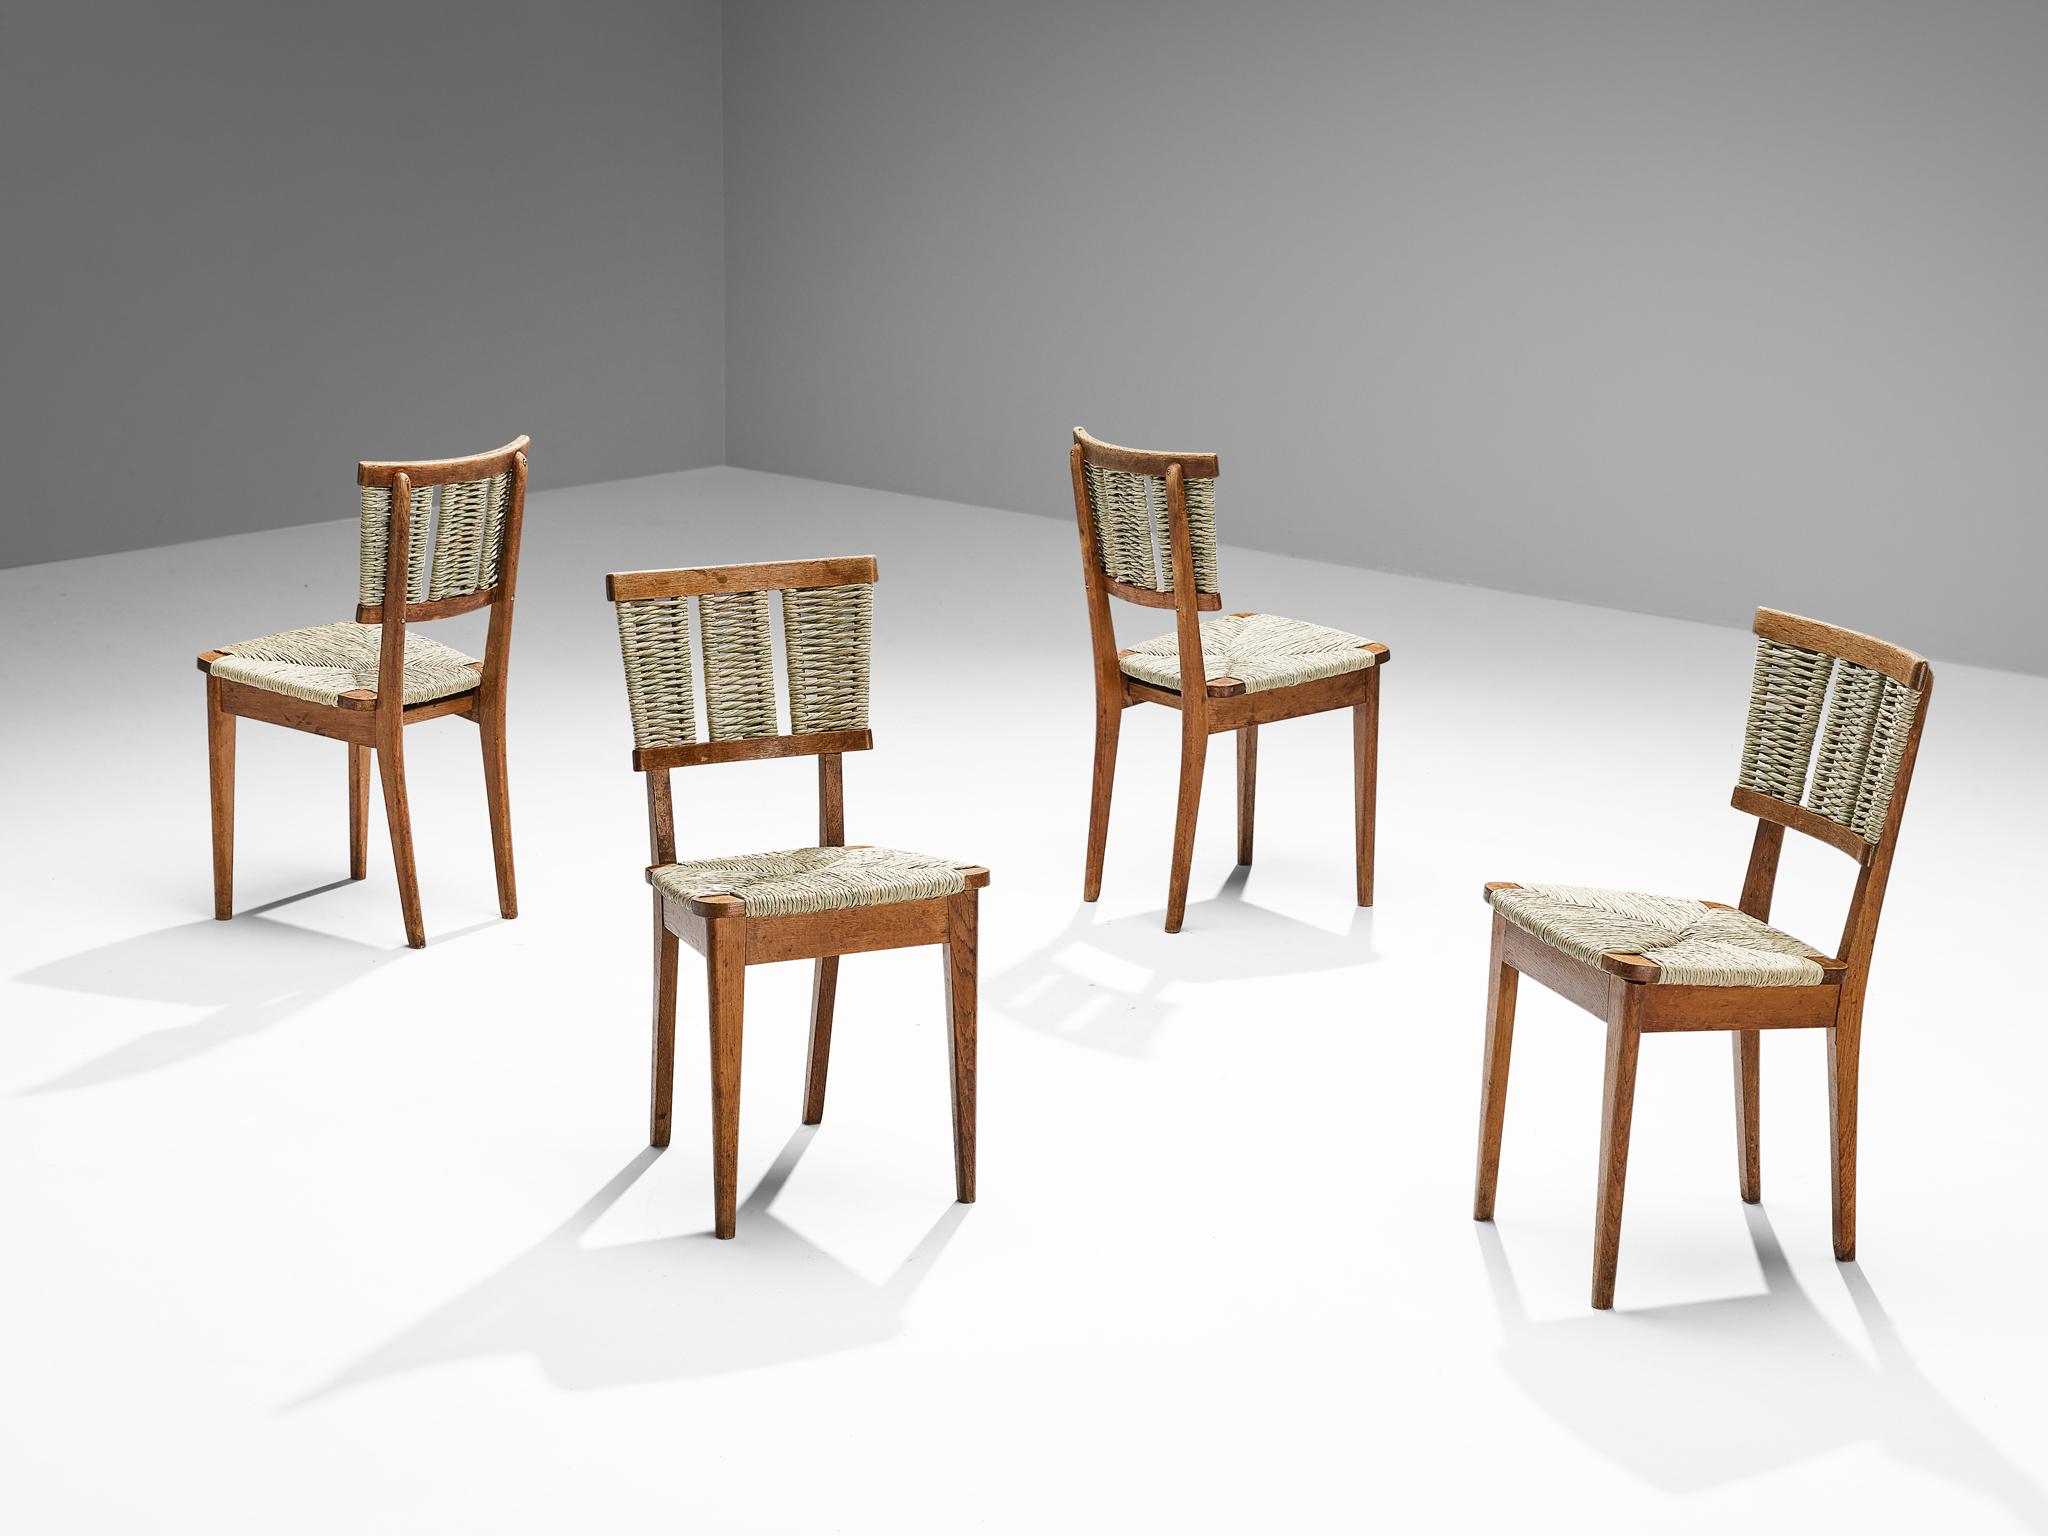 Mart Stam, set of four dining chairs, model 'A2-1', oak, seagrass, The Netherlands, 1947.

Executed in 1947, these dining chairs by Dutch modernist designer and architect Mart Stam (1899-1986) boasts a rustic character. This is achieved by the